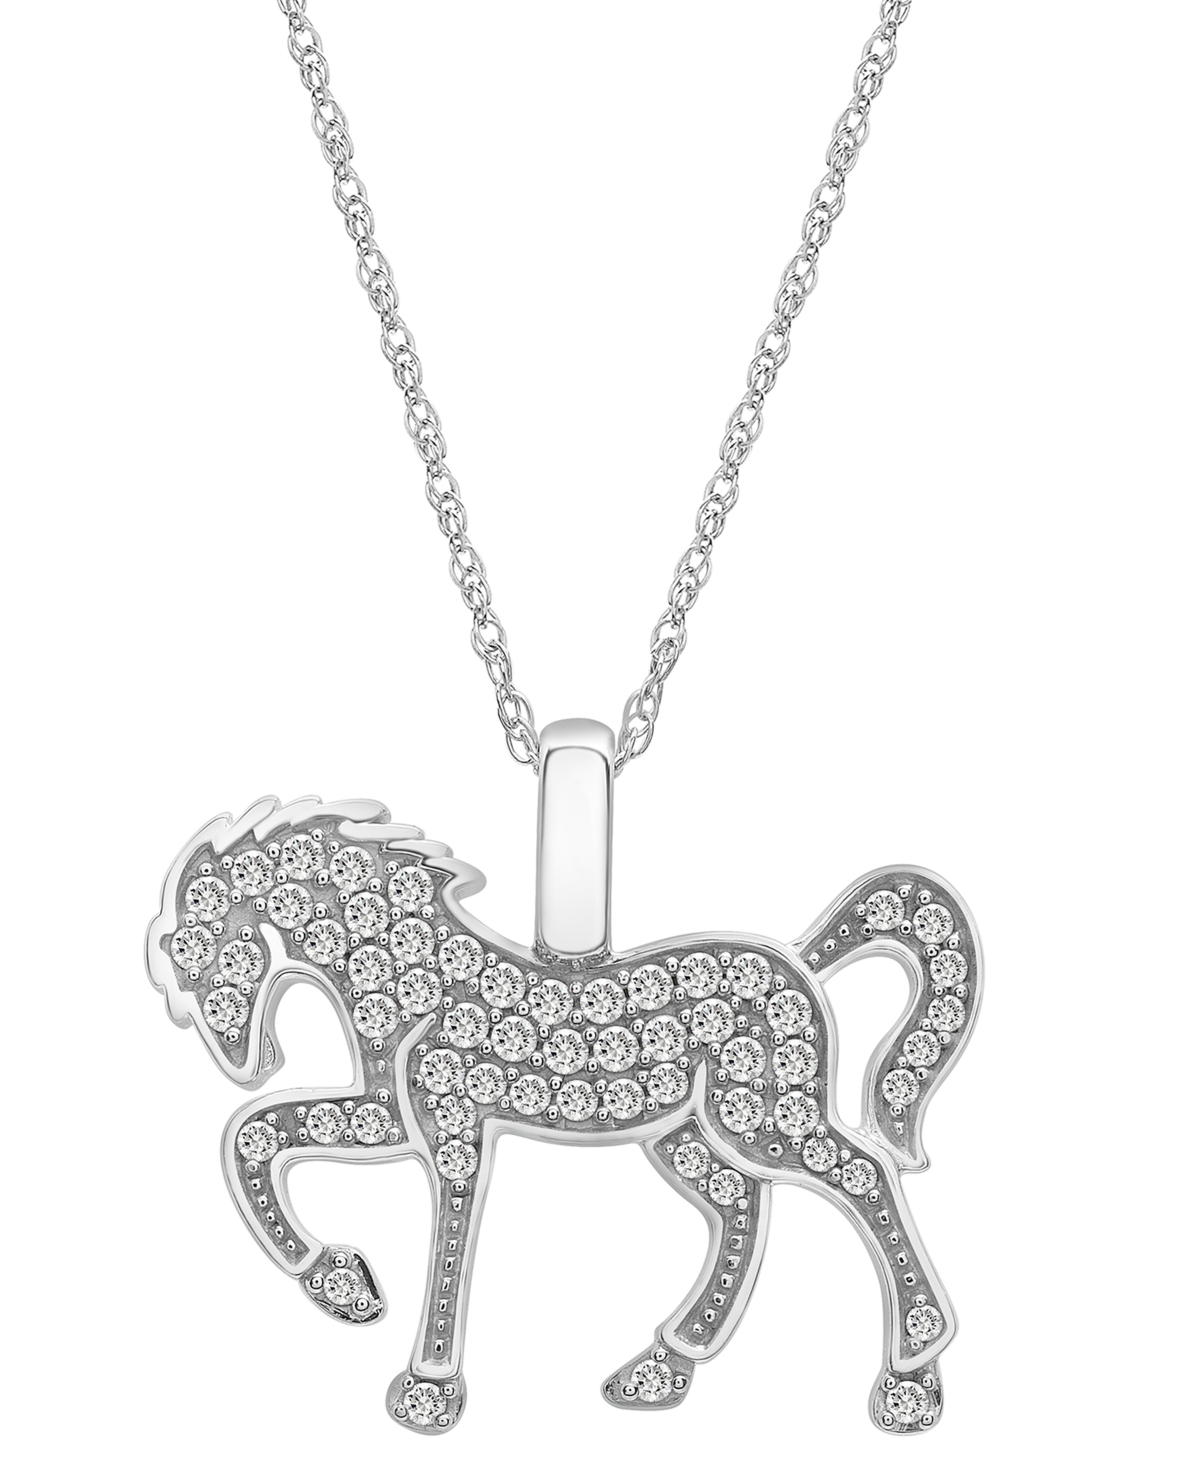 Diamond Horse Pendant Necklace (1/4 ct. t.w.) in 10k White Gold, 18" + 2" extender, Created for Macy's - White Gold